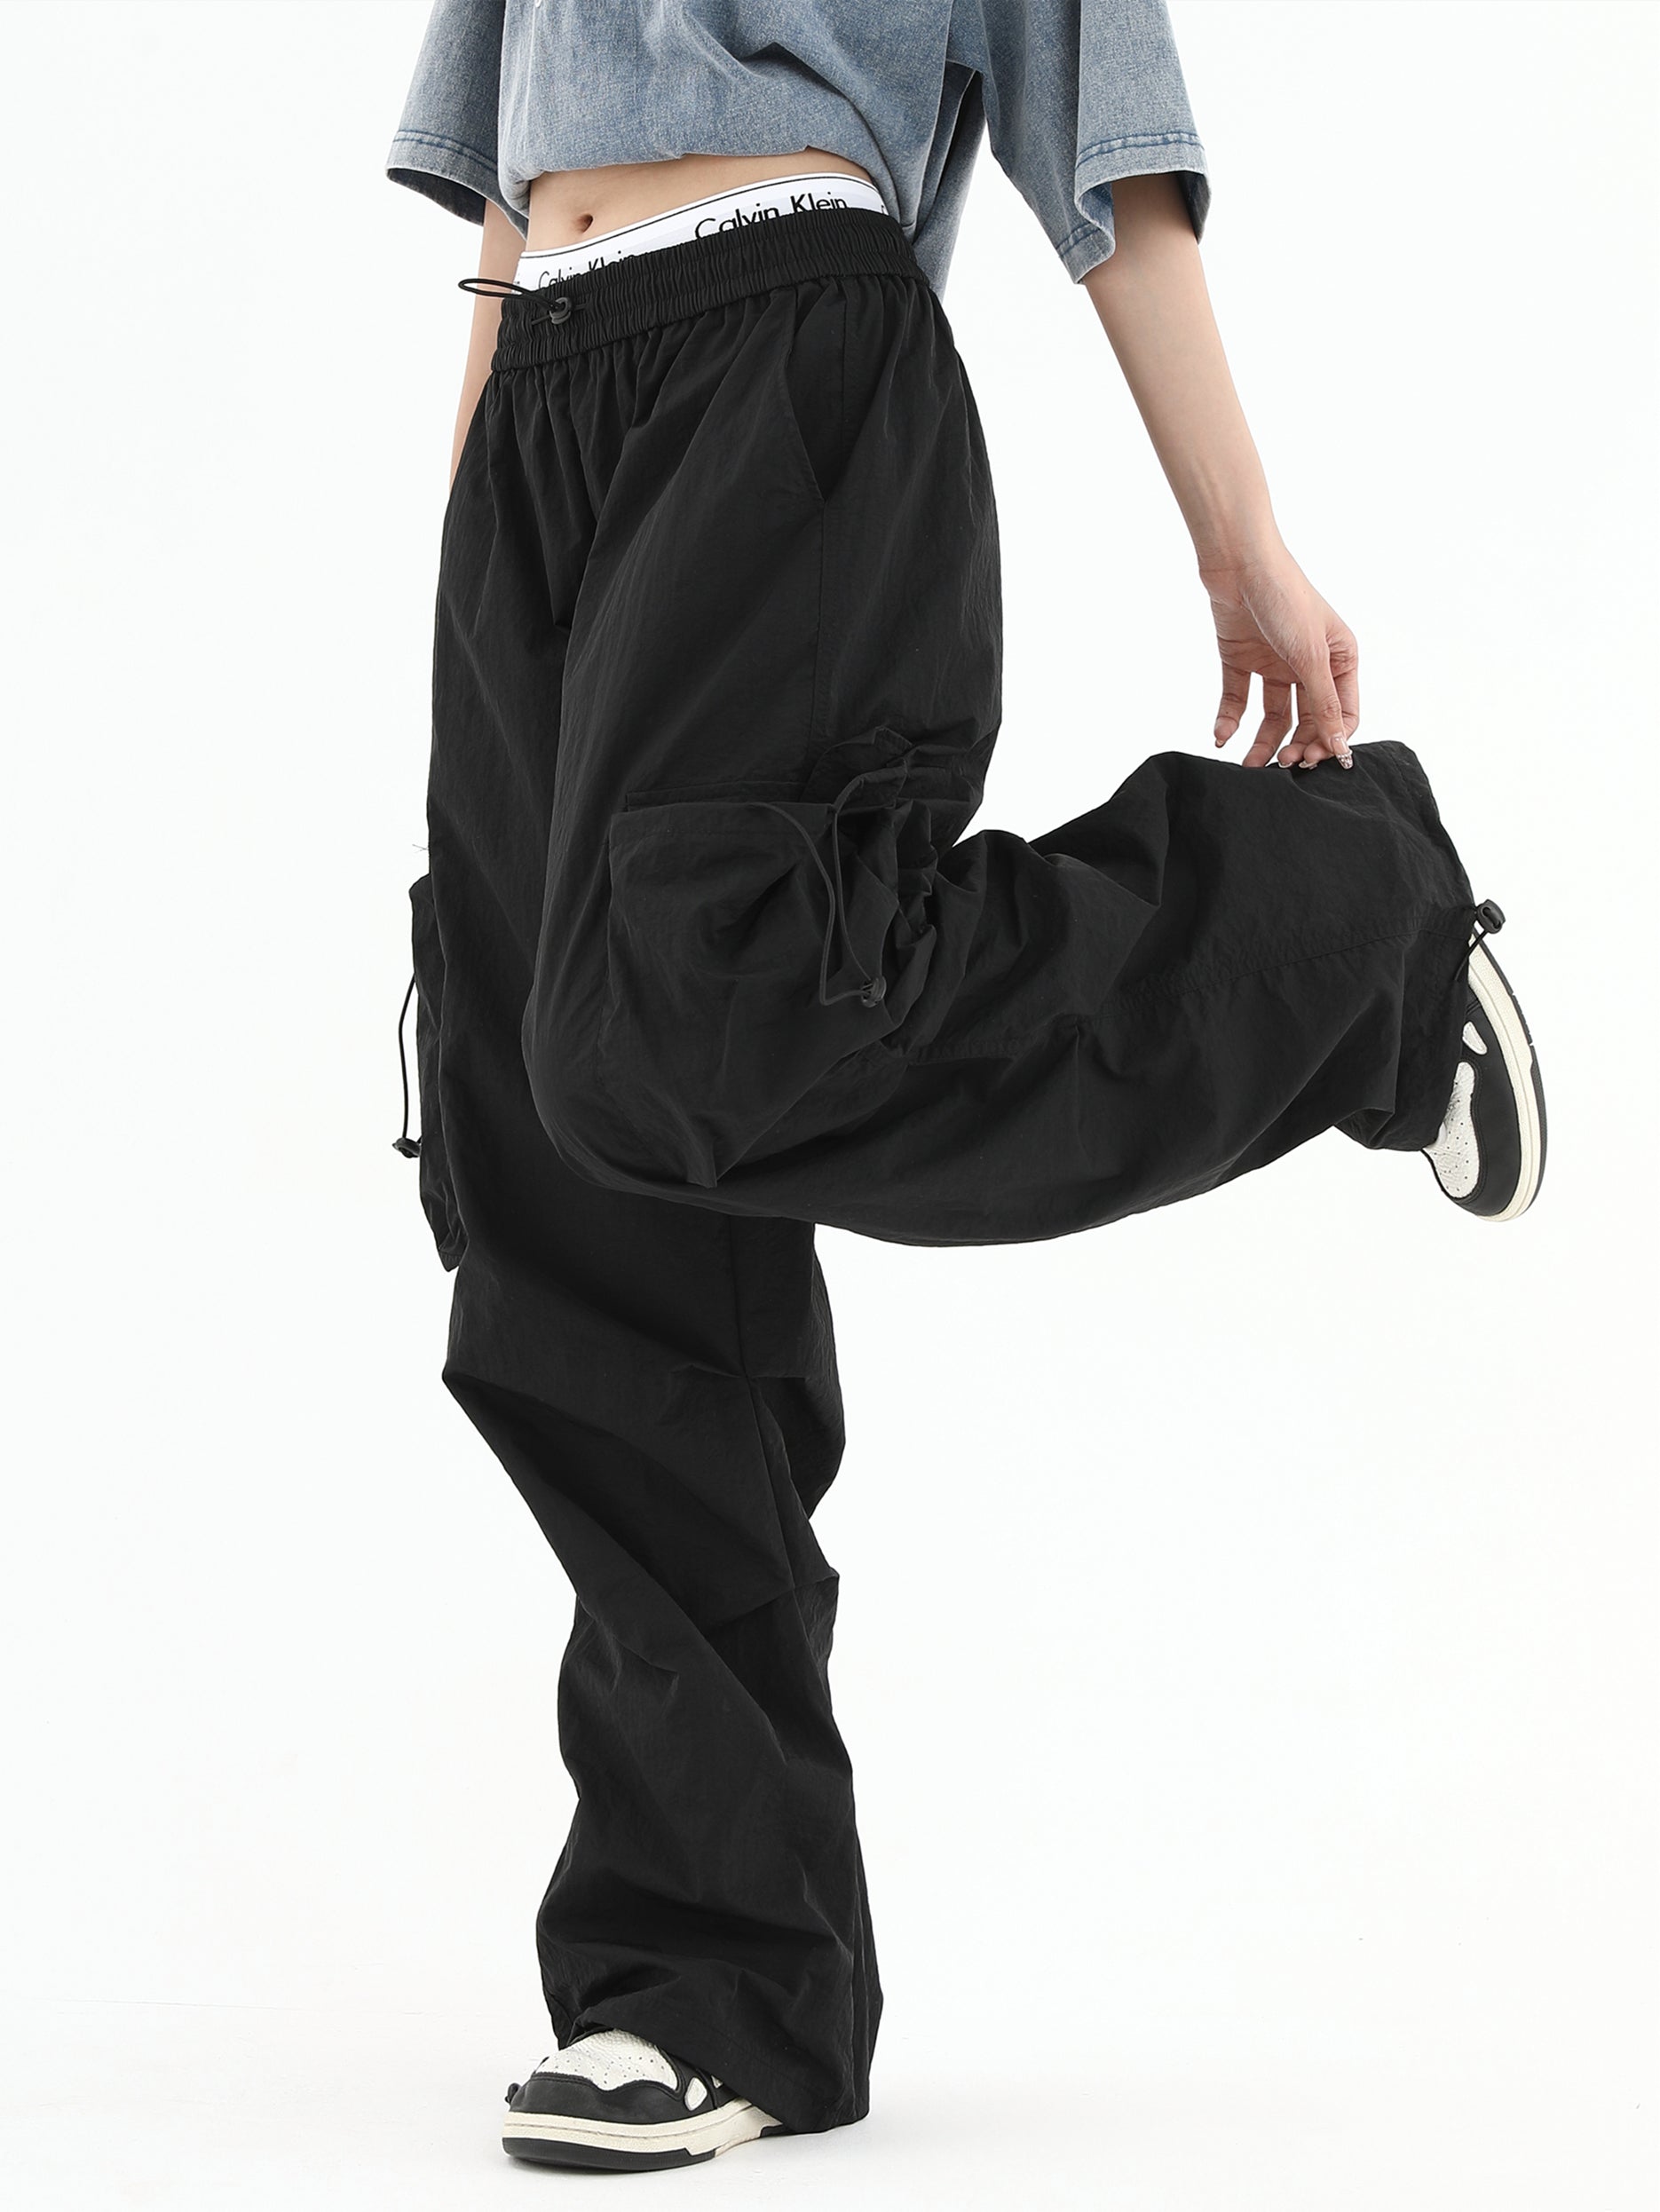 Casual Loose Fit Trousers with Pockets - chiclara